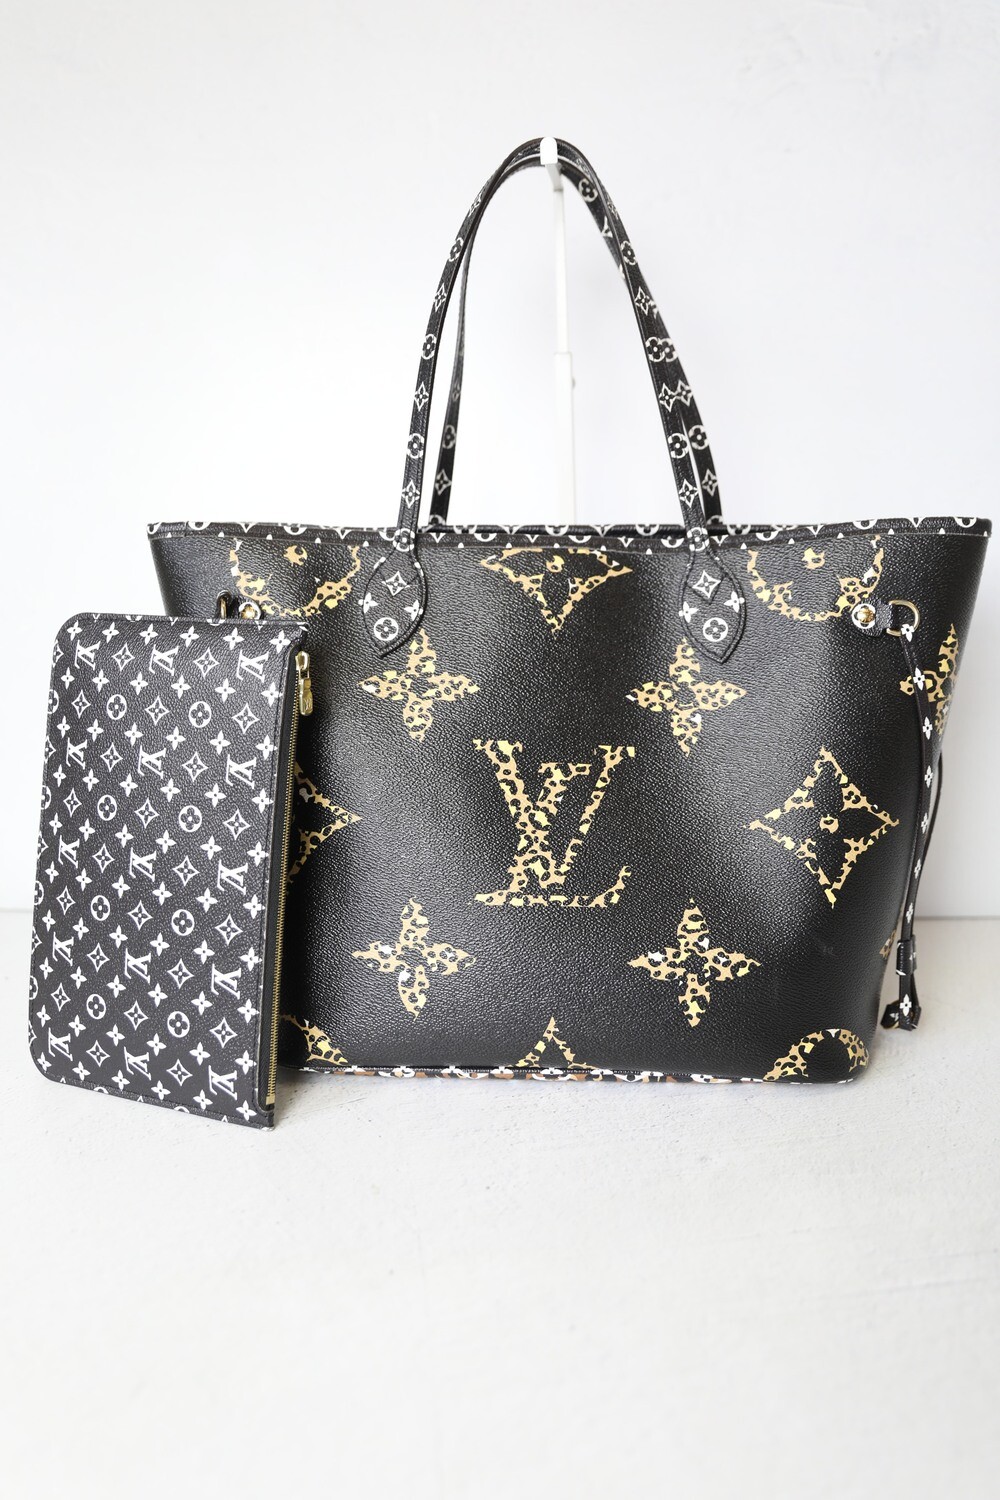 Louis Vuitton Neverfull MM Set, Giant Jungle Black, Preowned in